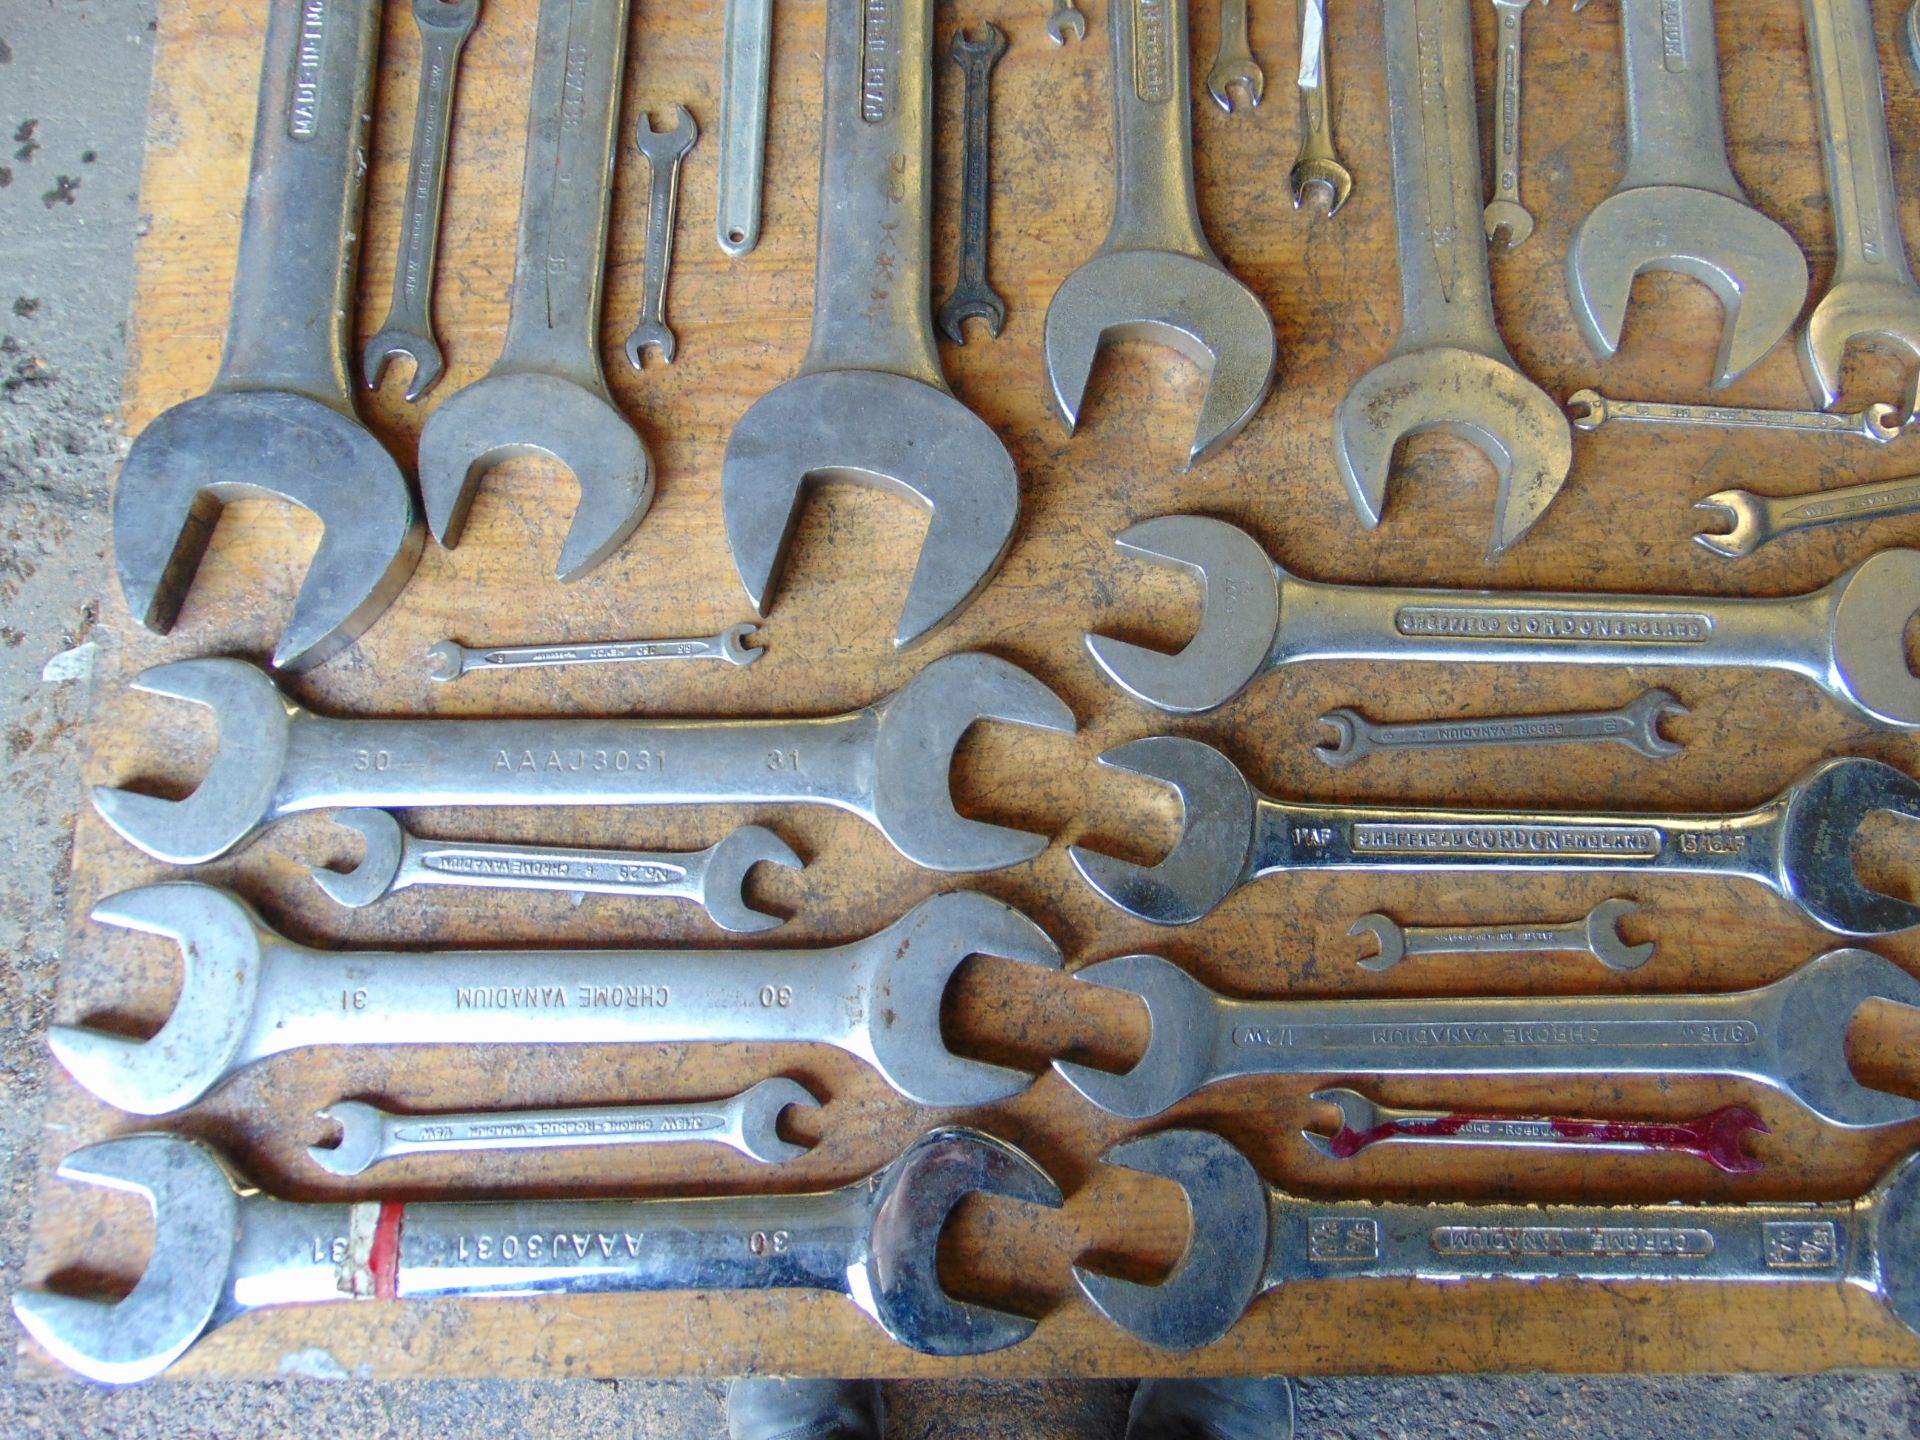 Assortment of Spanners - Image 5 of 7